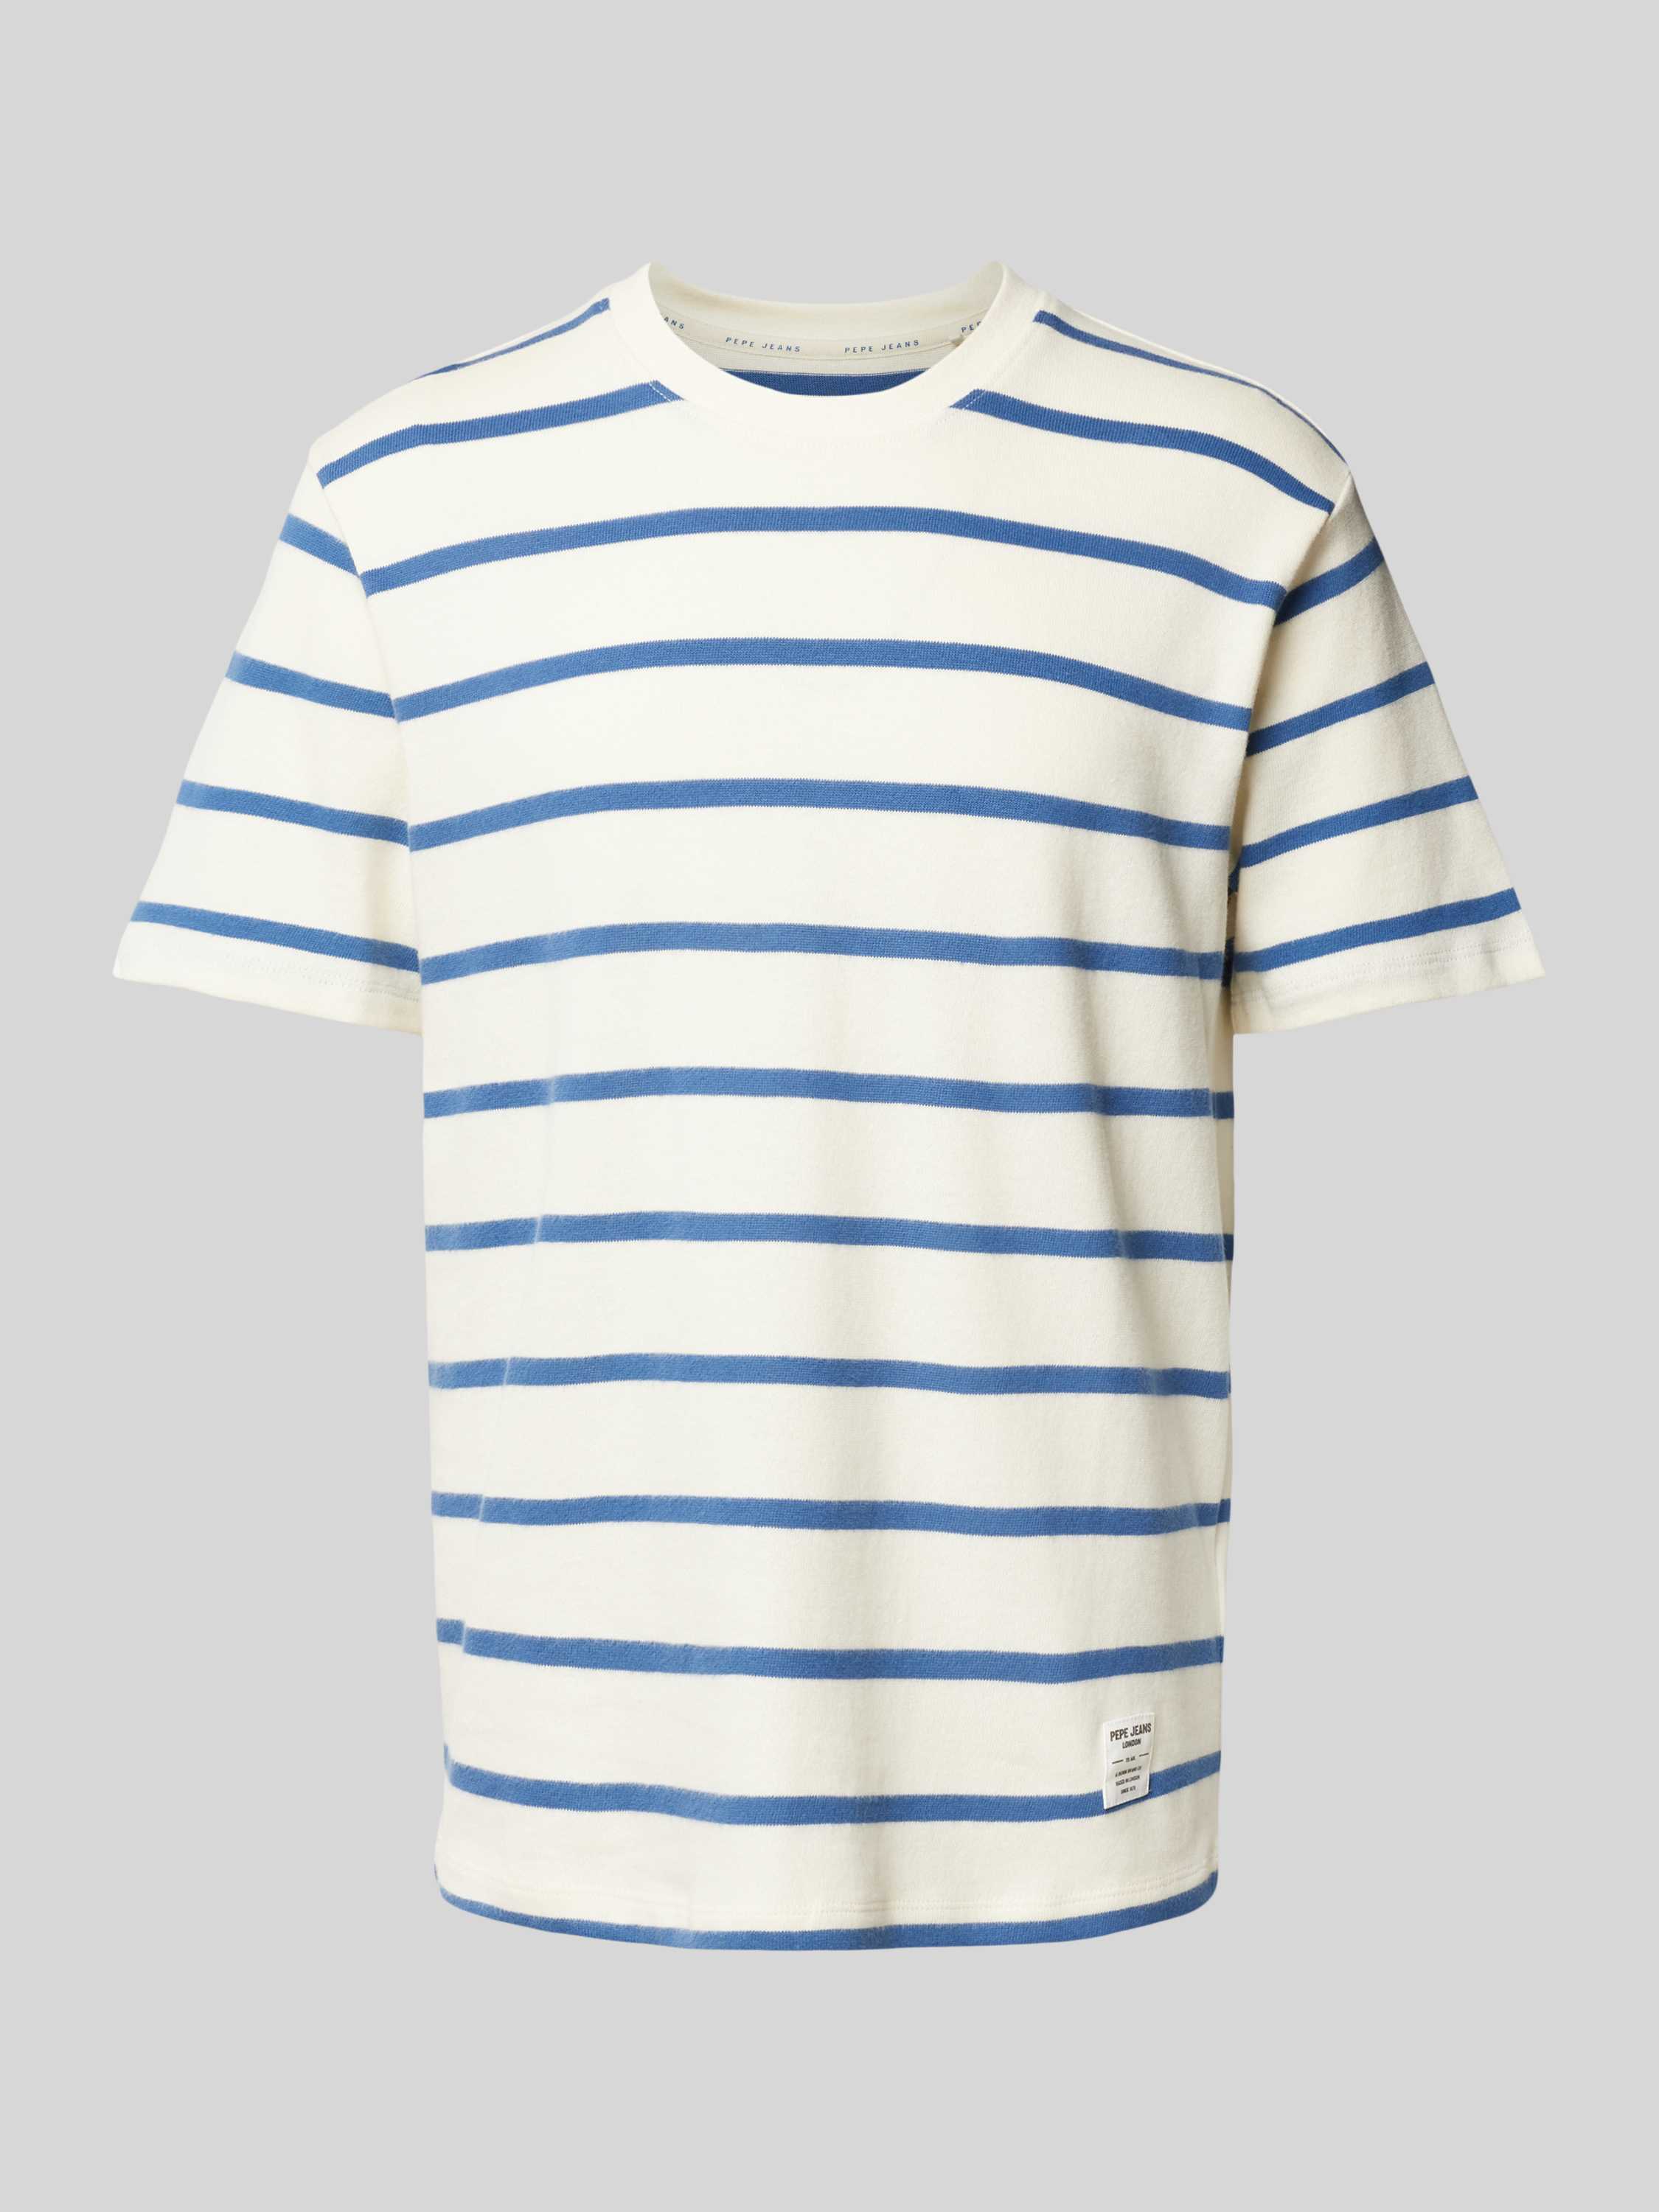 Pepe Jeans T-shirt met labelpatch model 'Alessandro'